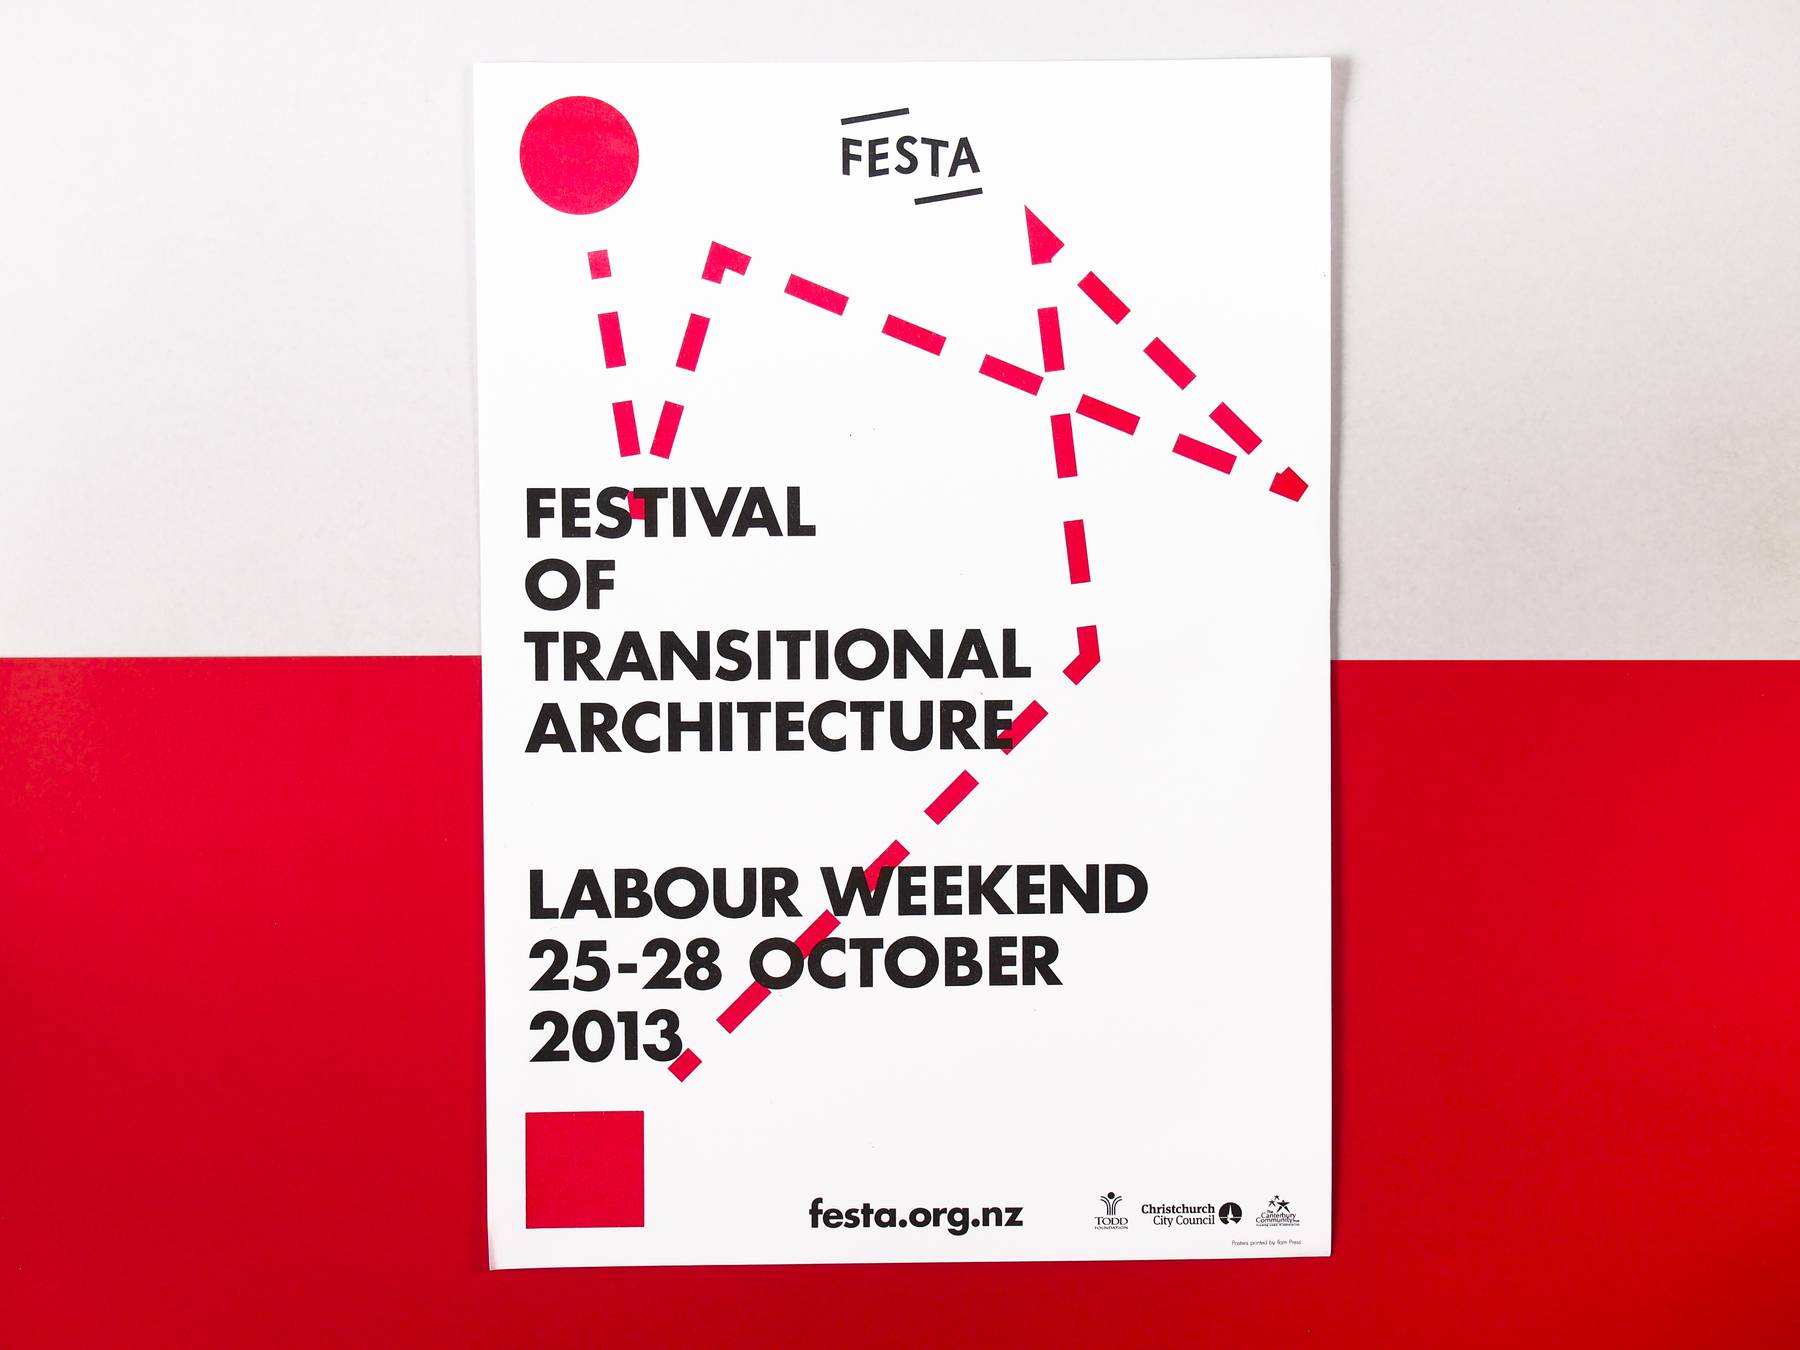 Festival of Transitional Architecture image